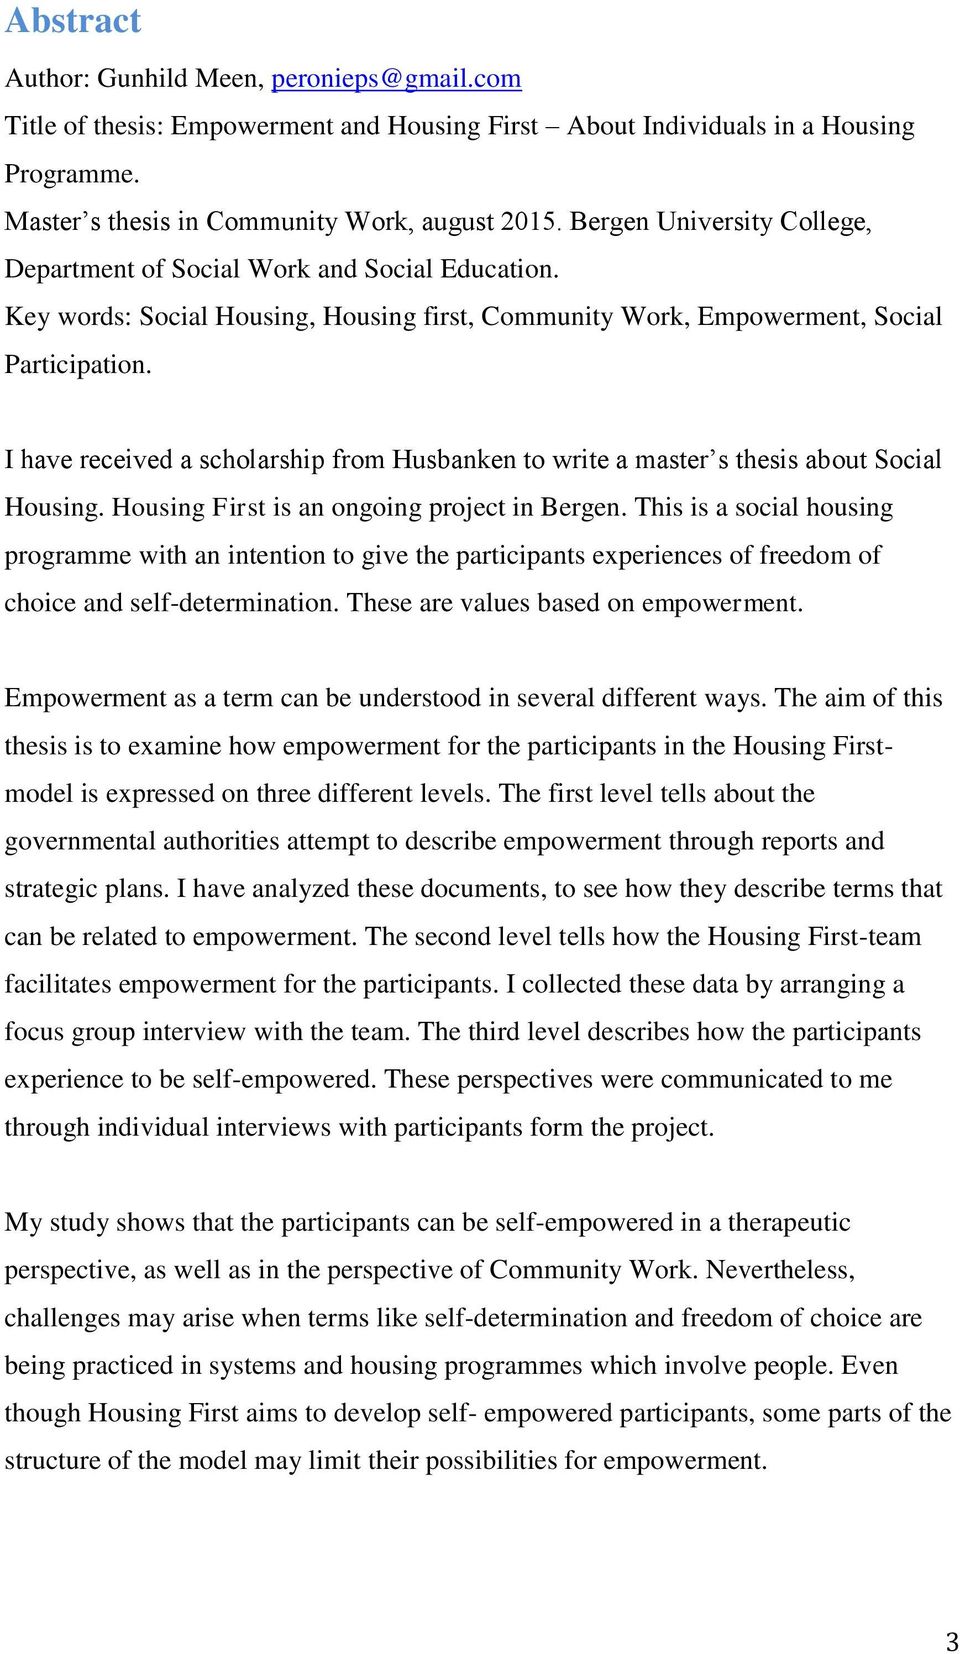 I have received a scholarship from Husbanken to write a master s thesis about Social Housing. Housing First is an ongoing project in Bergen.